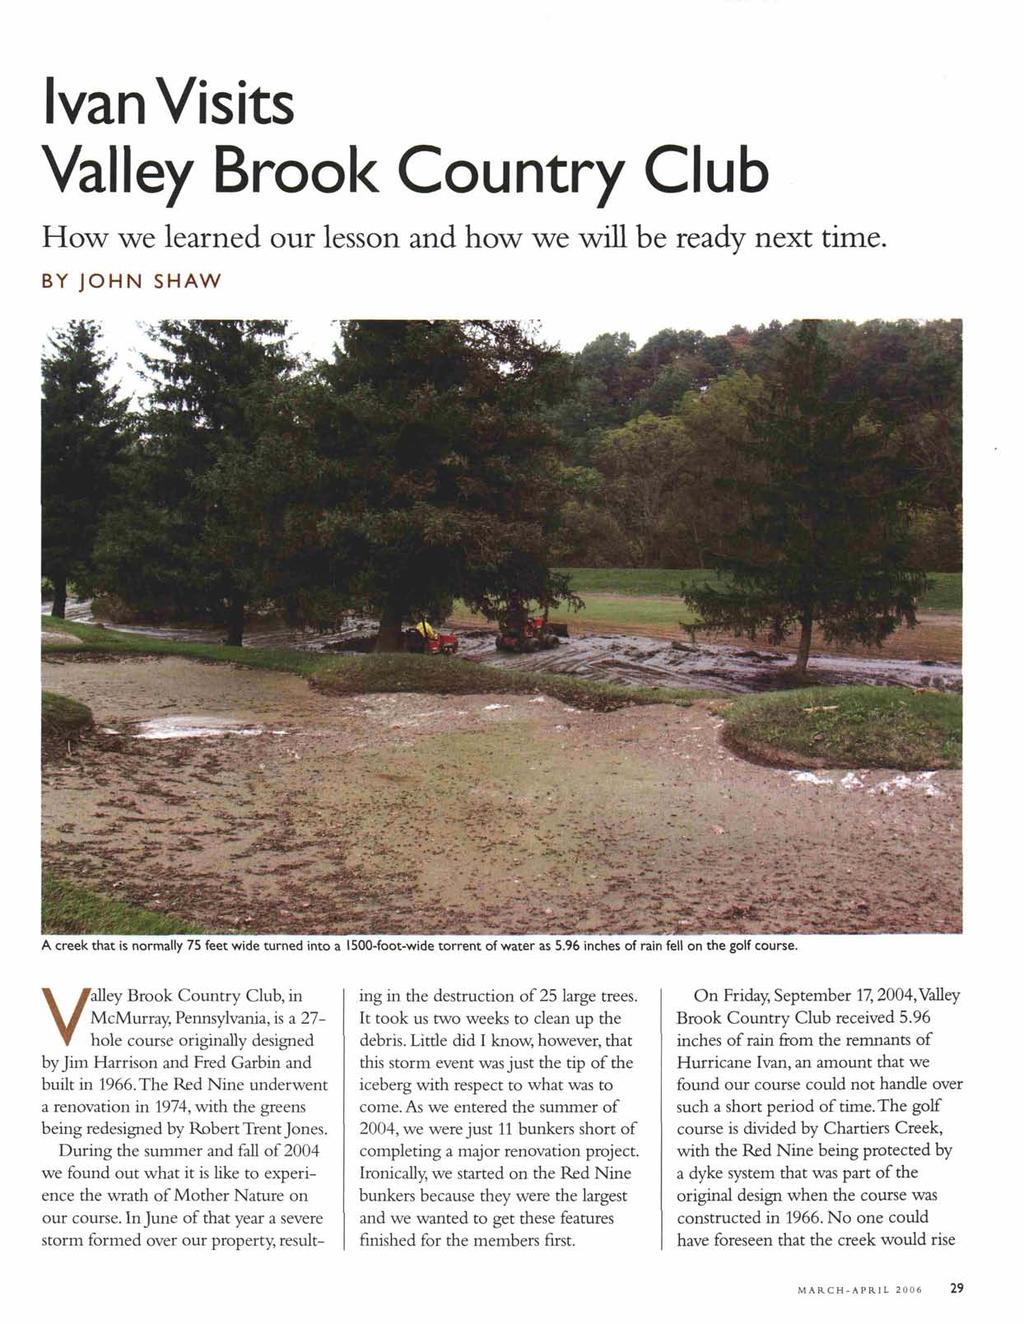 Ivan Visits Valley Brook Country Club How we learned our lesson and how we will be ready next time.